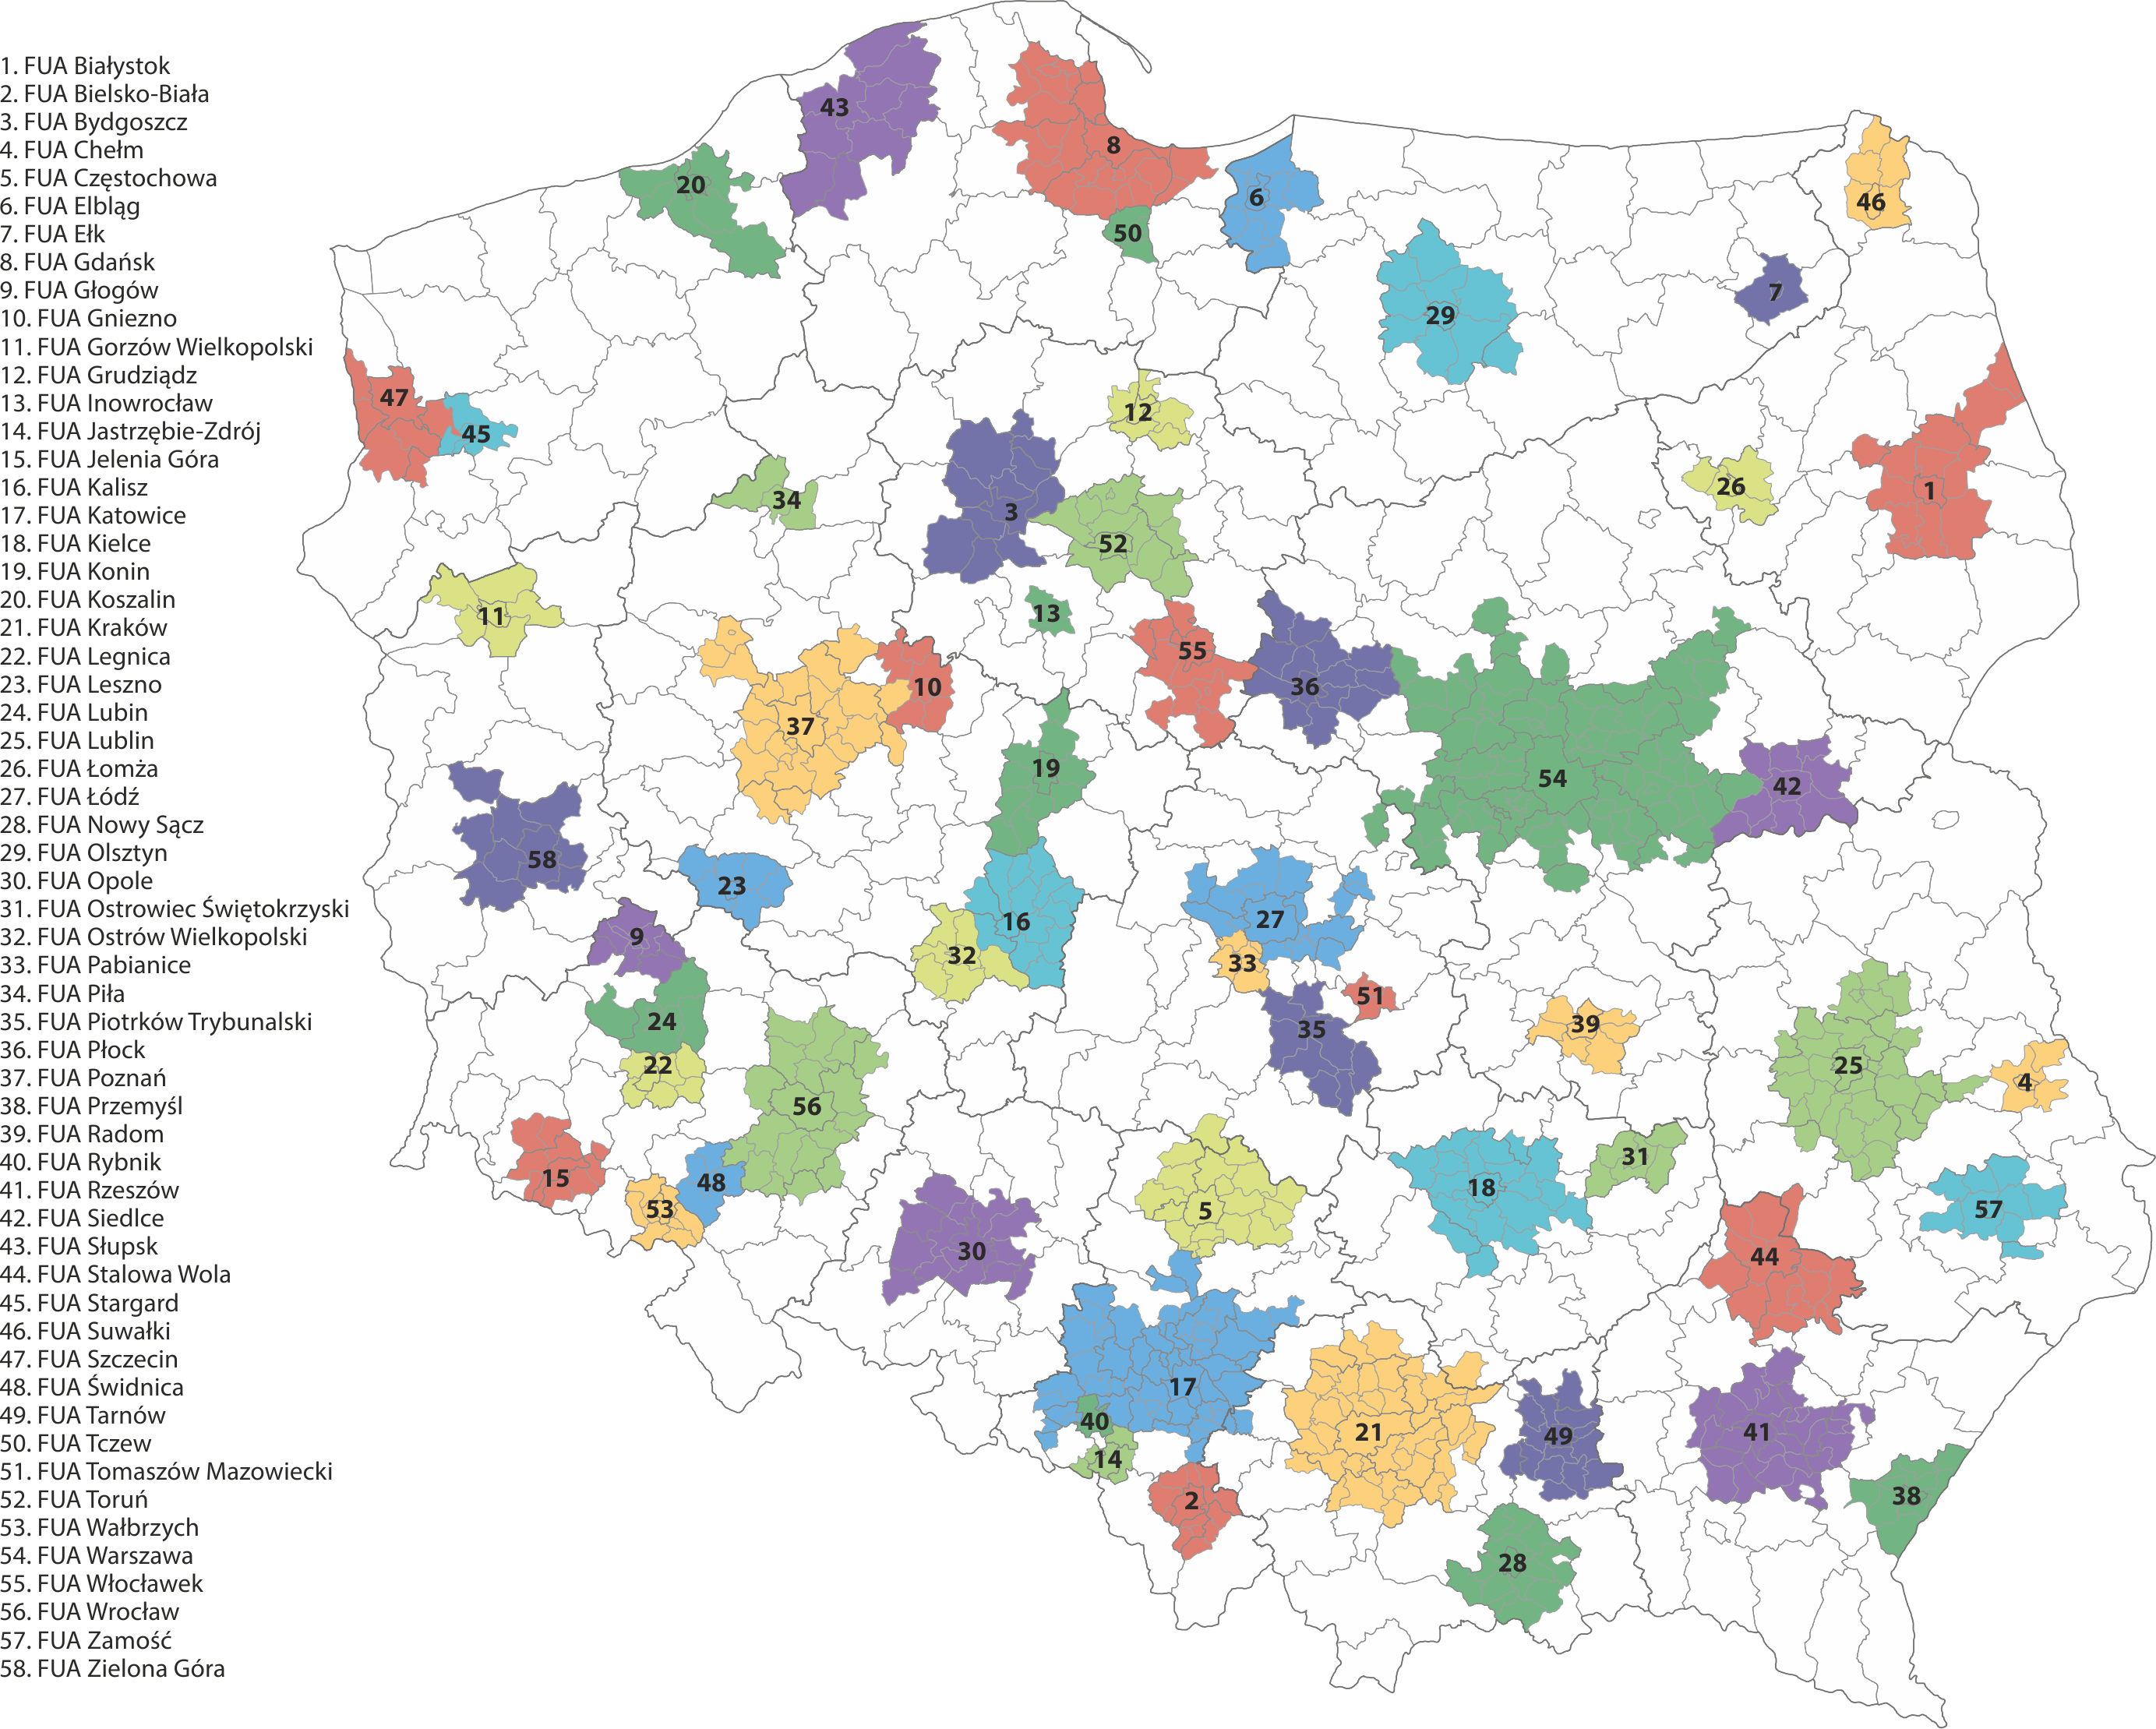 Functional urban areas (FUAs) in Poland in 2018